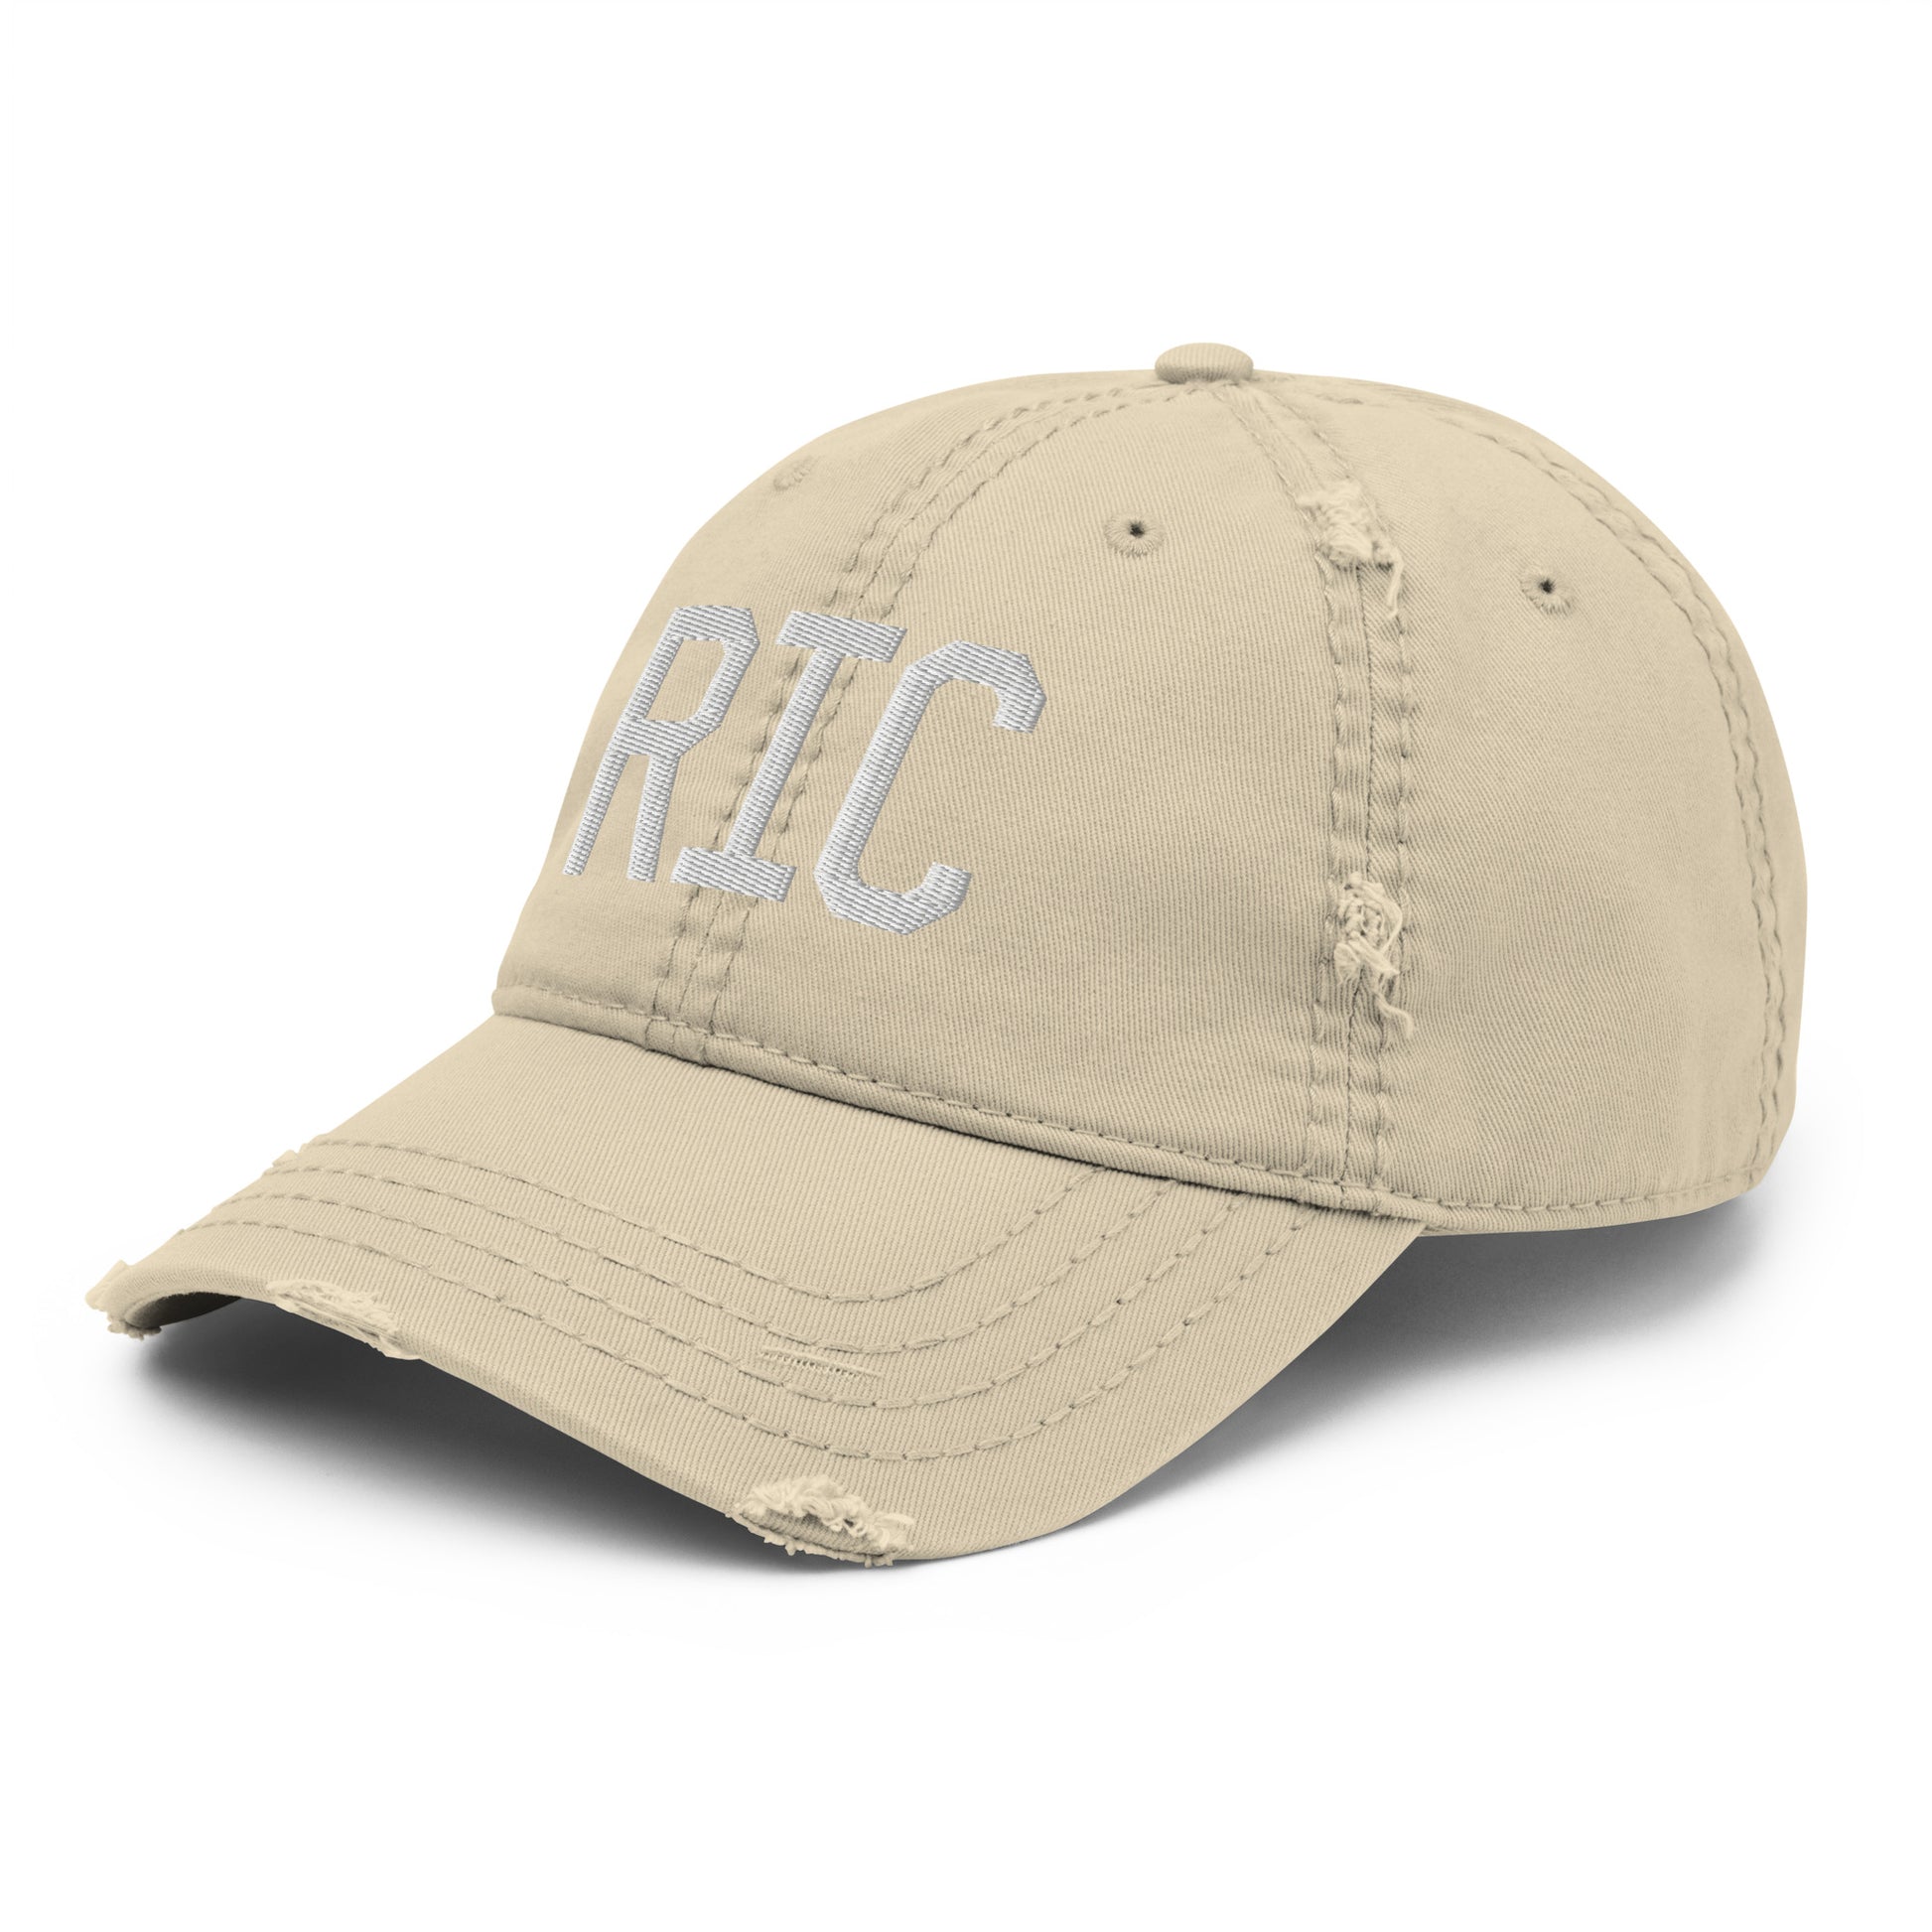 Airport Code Distressed Hat - White • RIC Richmond • YHM Designs - Image 19